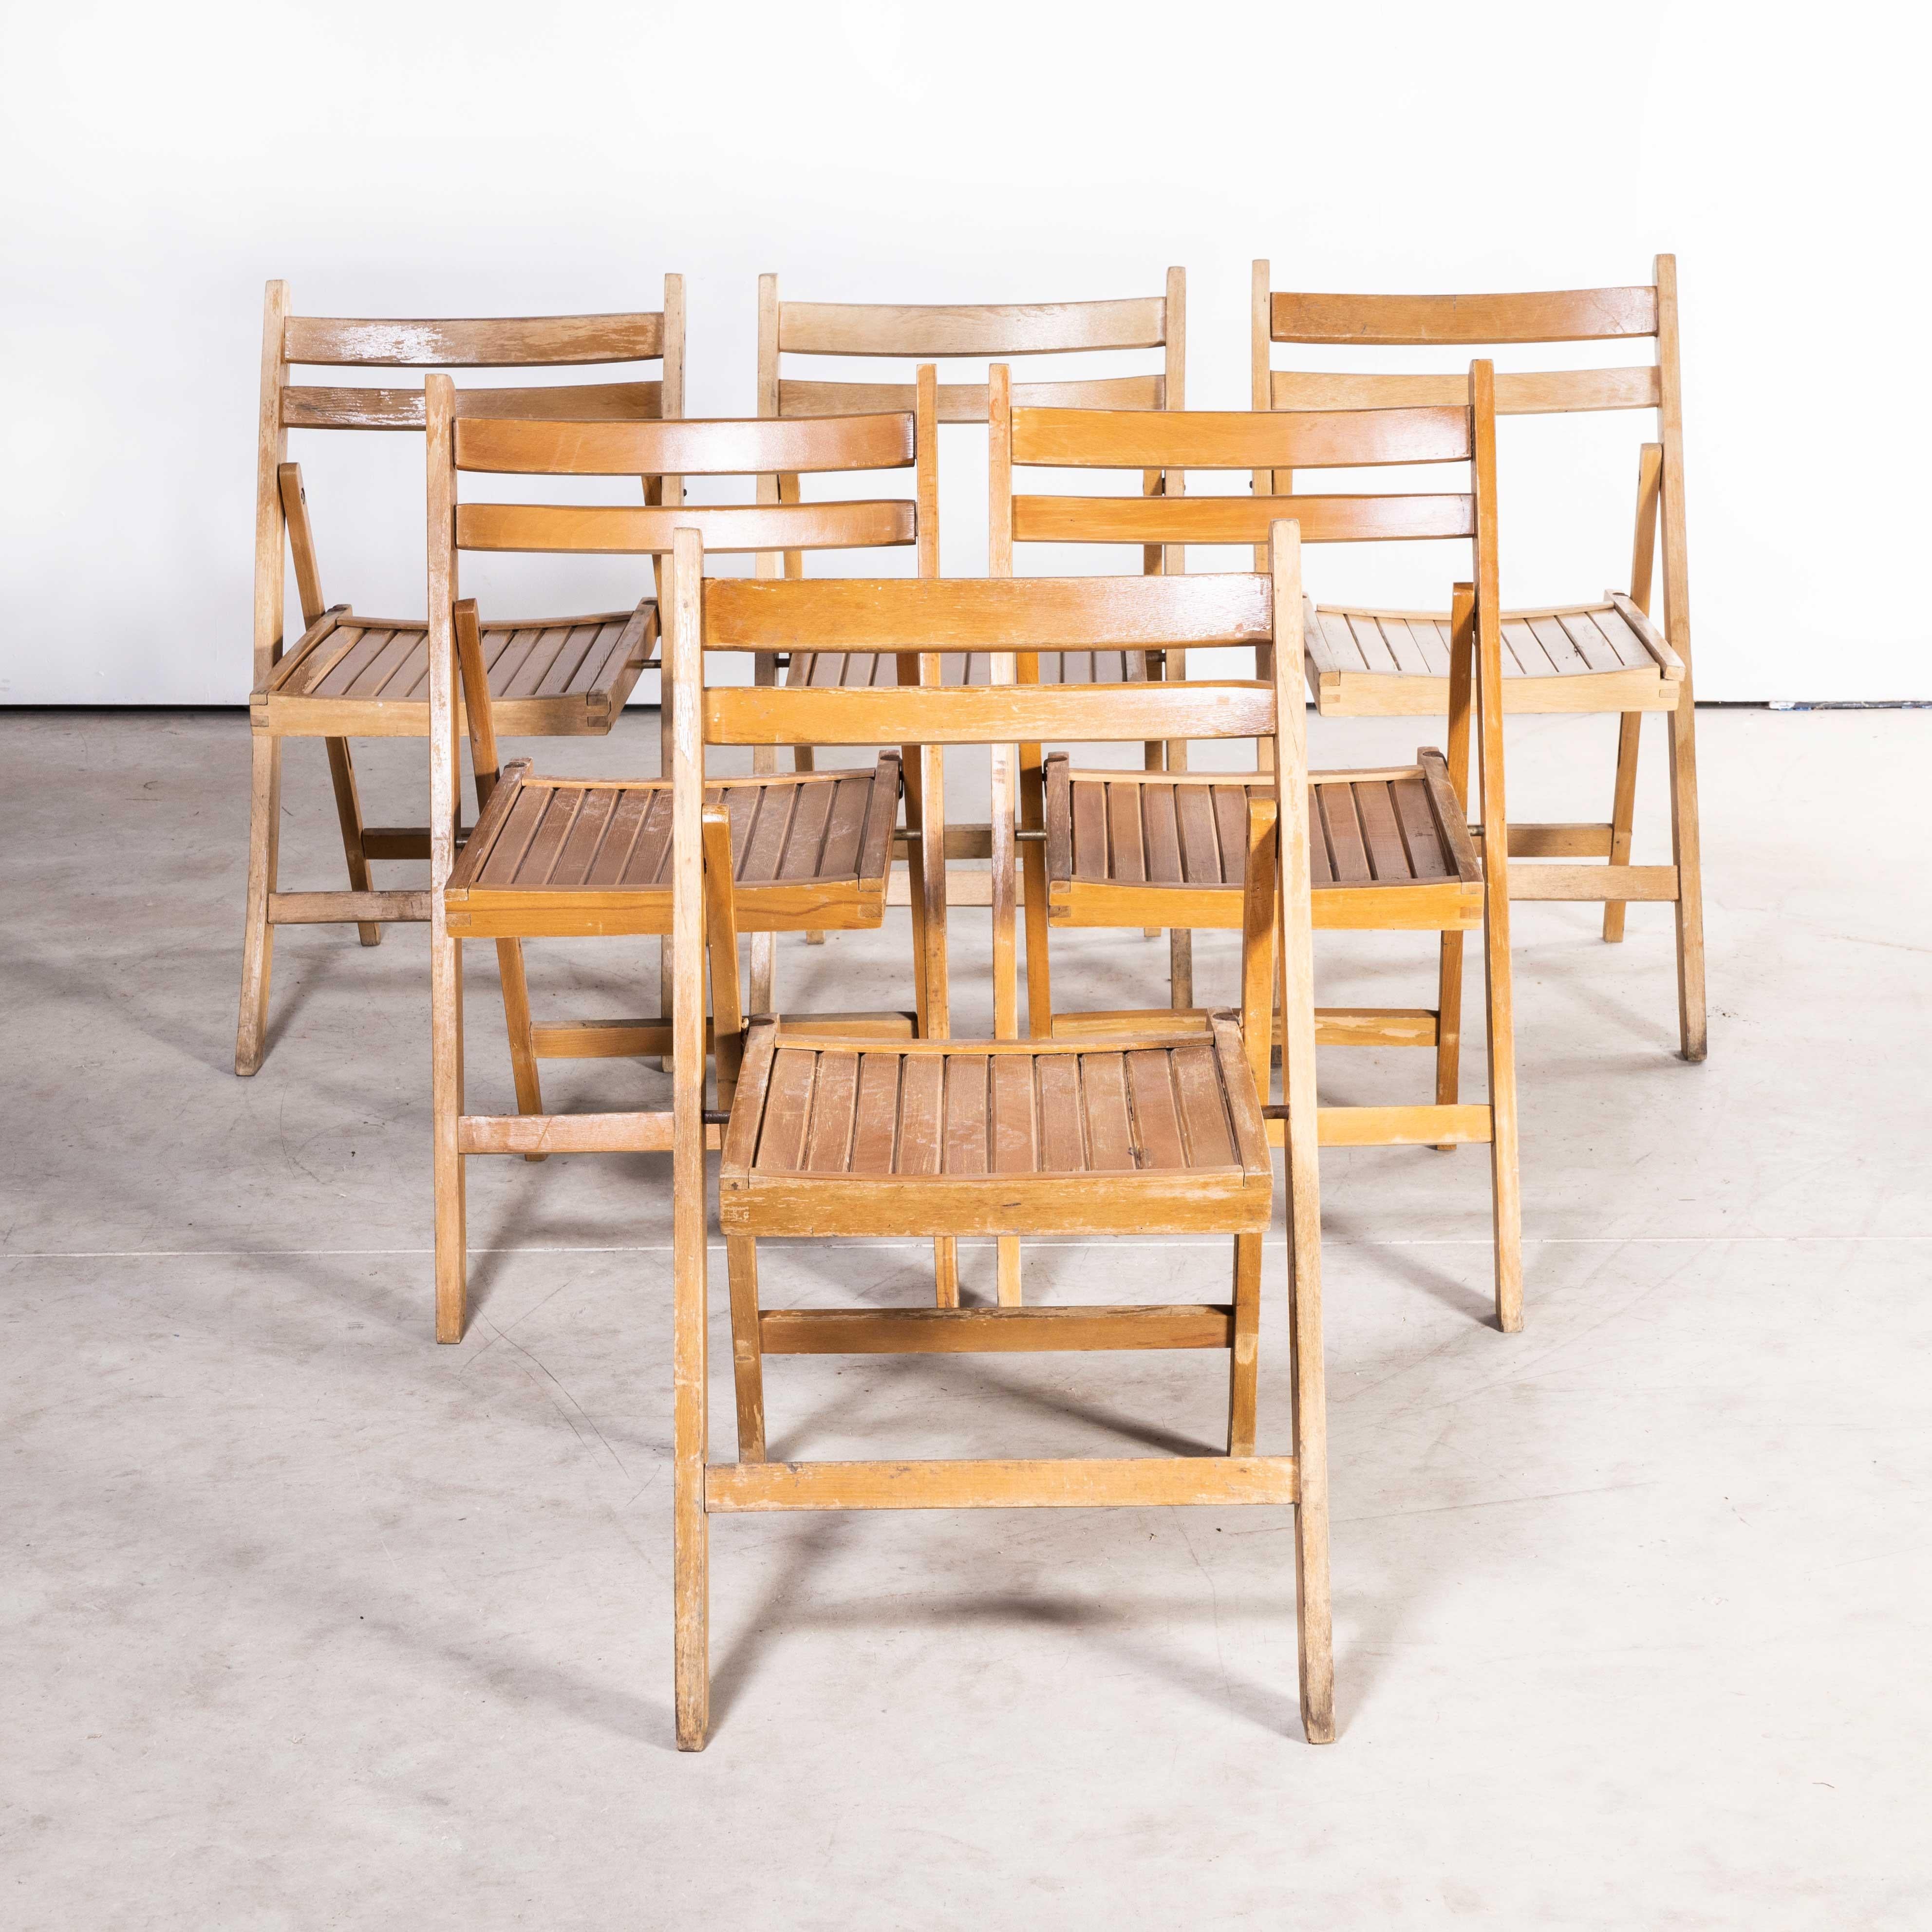 1960s Beech folding chairs – set of six – (model 2178)
1960s Beech folding chairs – set of six – (model 2178). Good practical classic folding chairs originally made in Germany of solid beech. Every chair passes through our workshops where they are